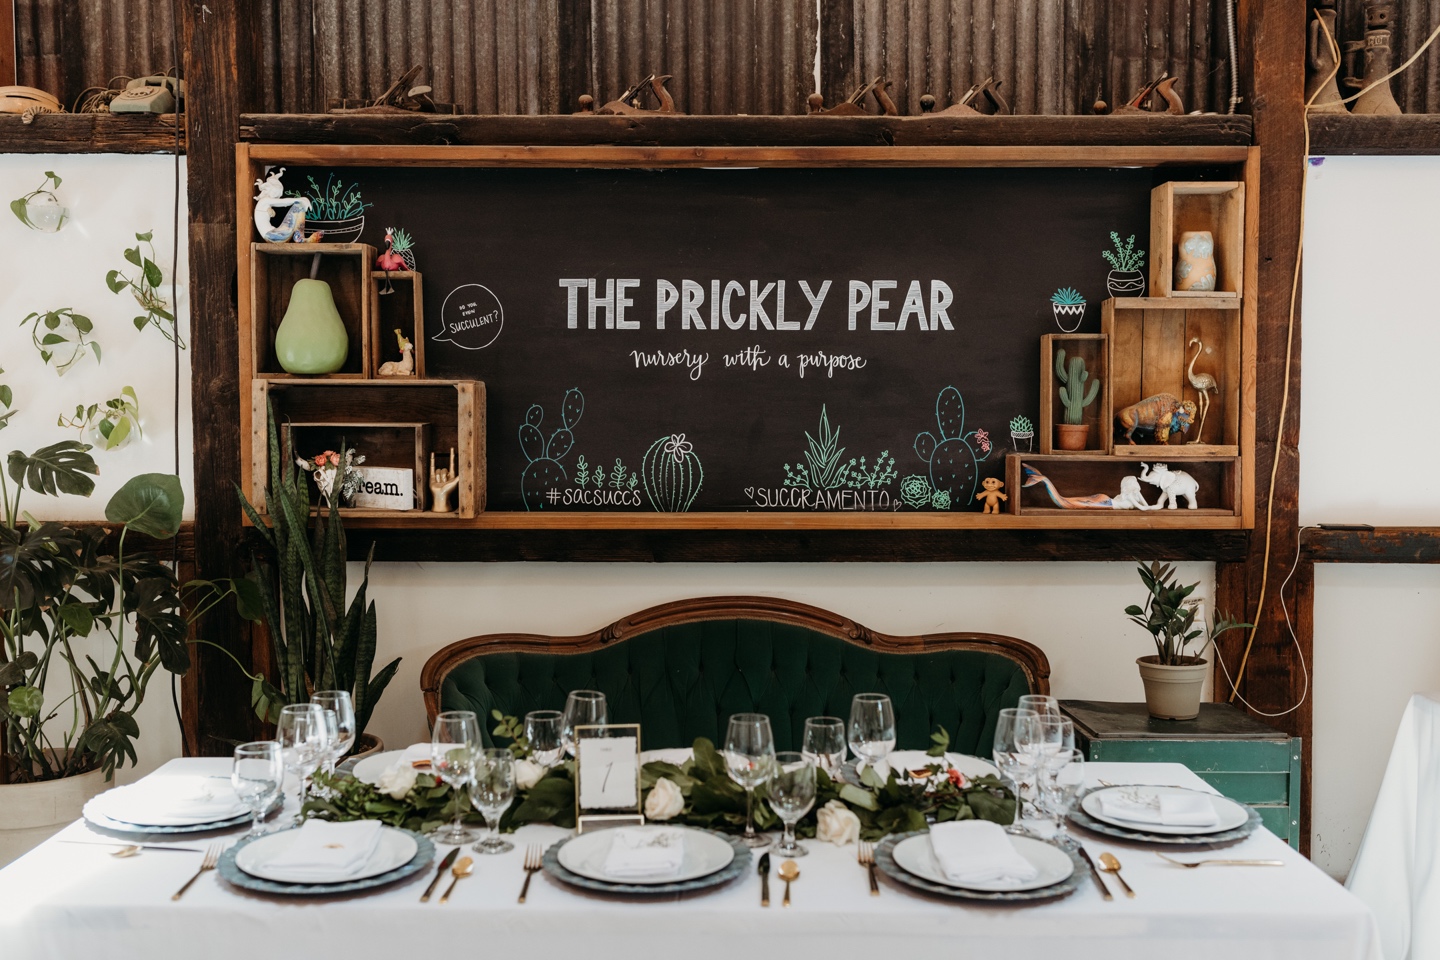 Table setting with Prickly Pear sign and green plants. Liz Koston Photography.